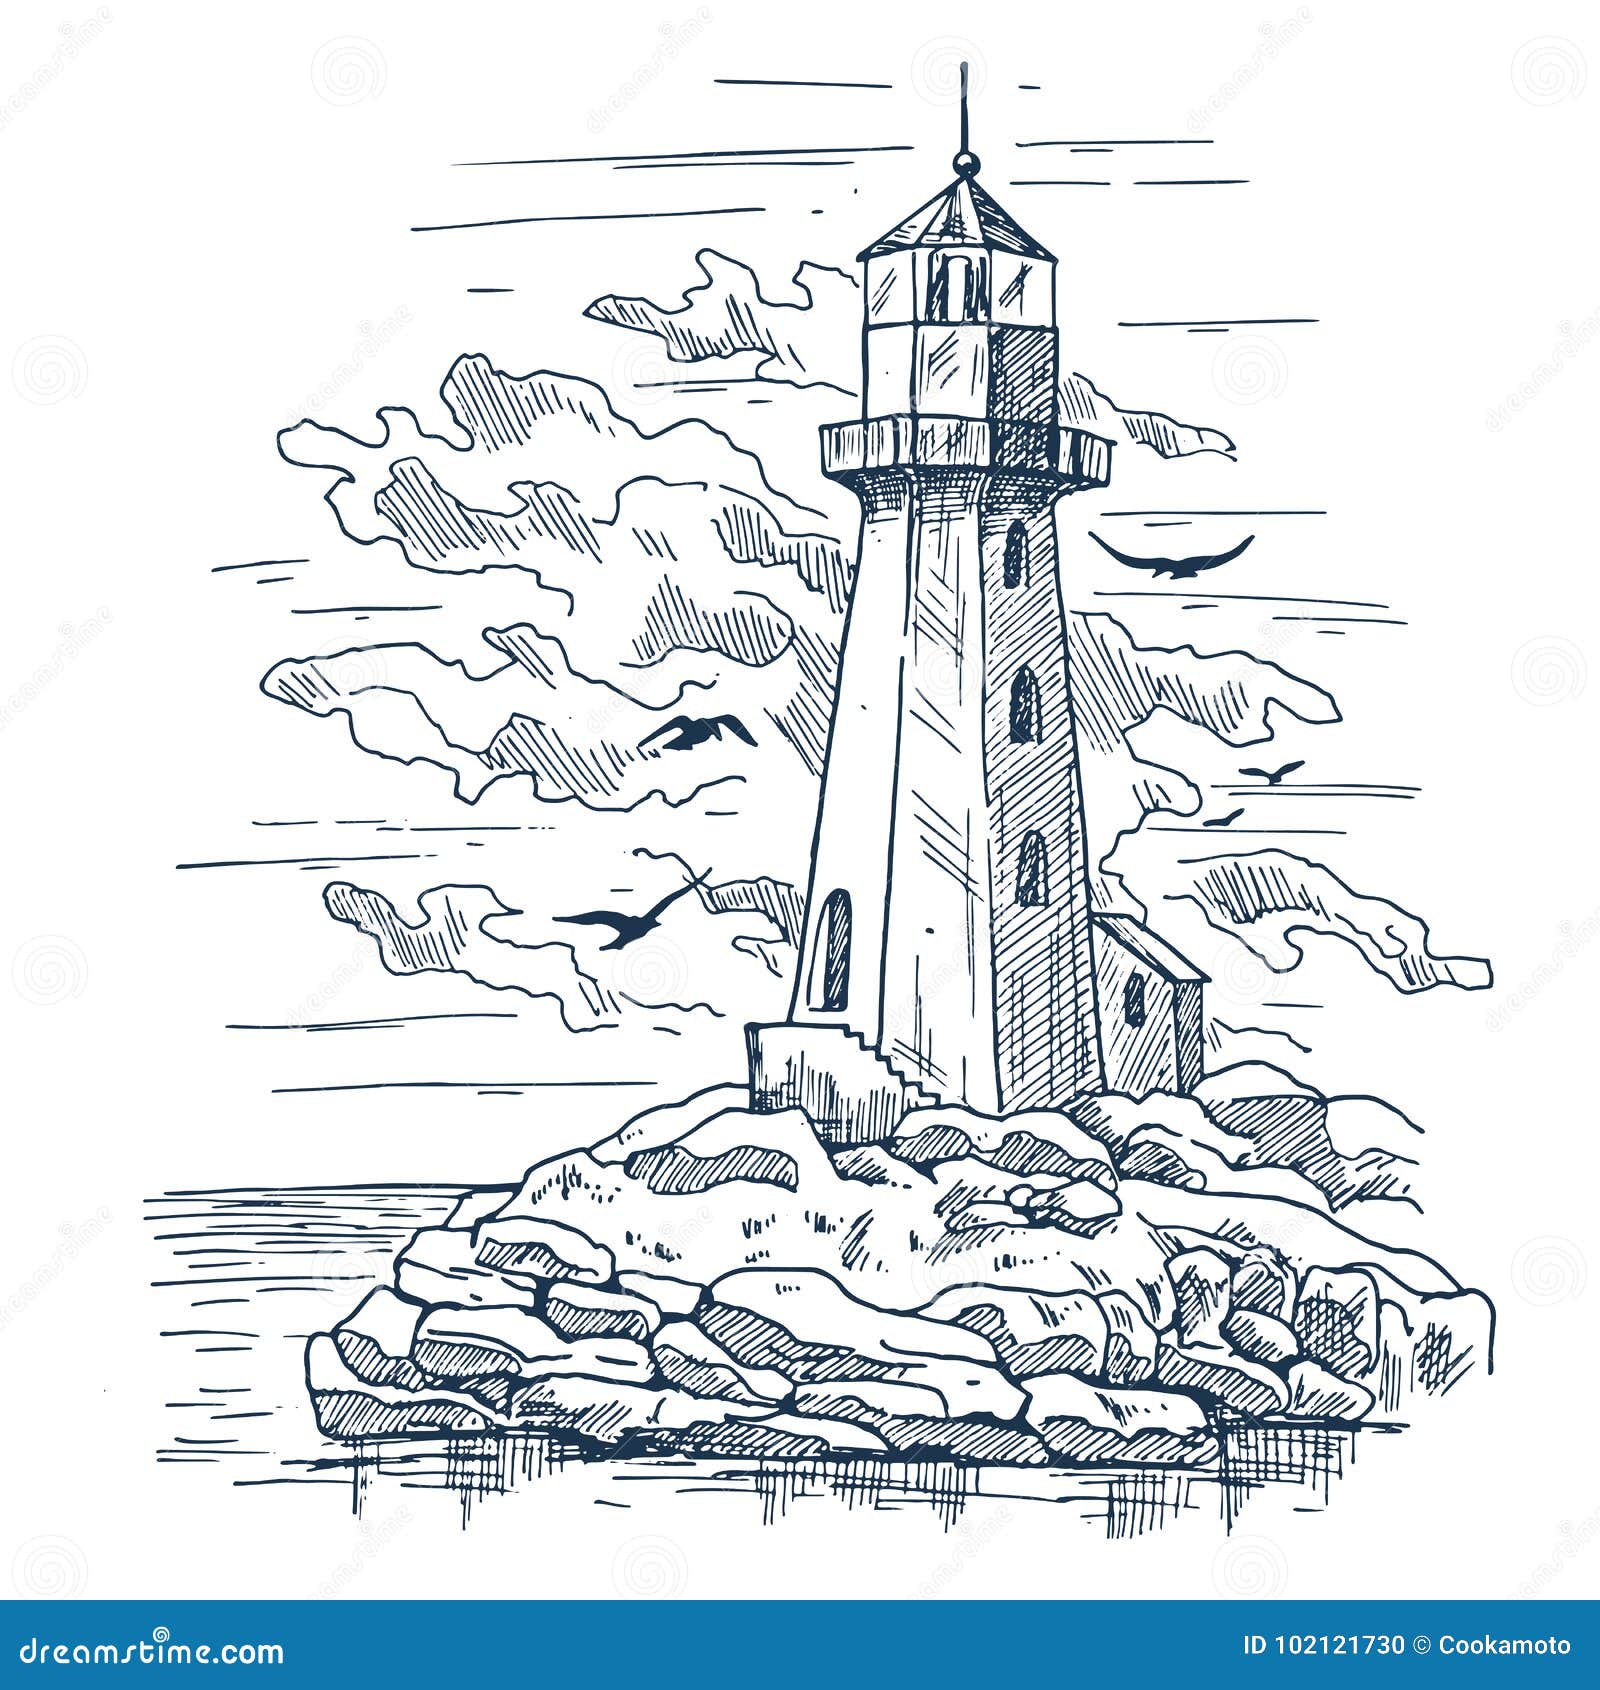 Lighthouse drawing outline easy  How to draw Lighthouse step by step easy   Outline drawings  YouTube